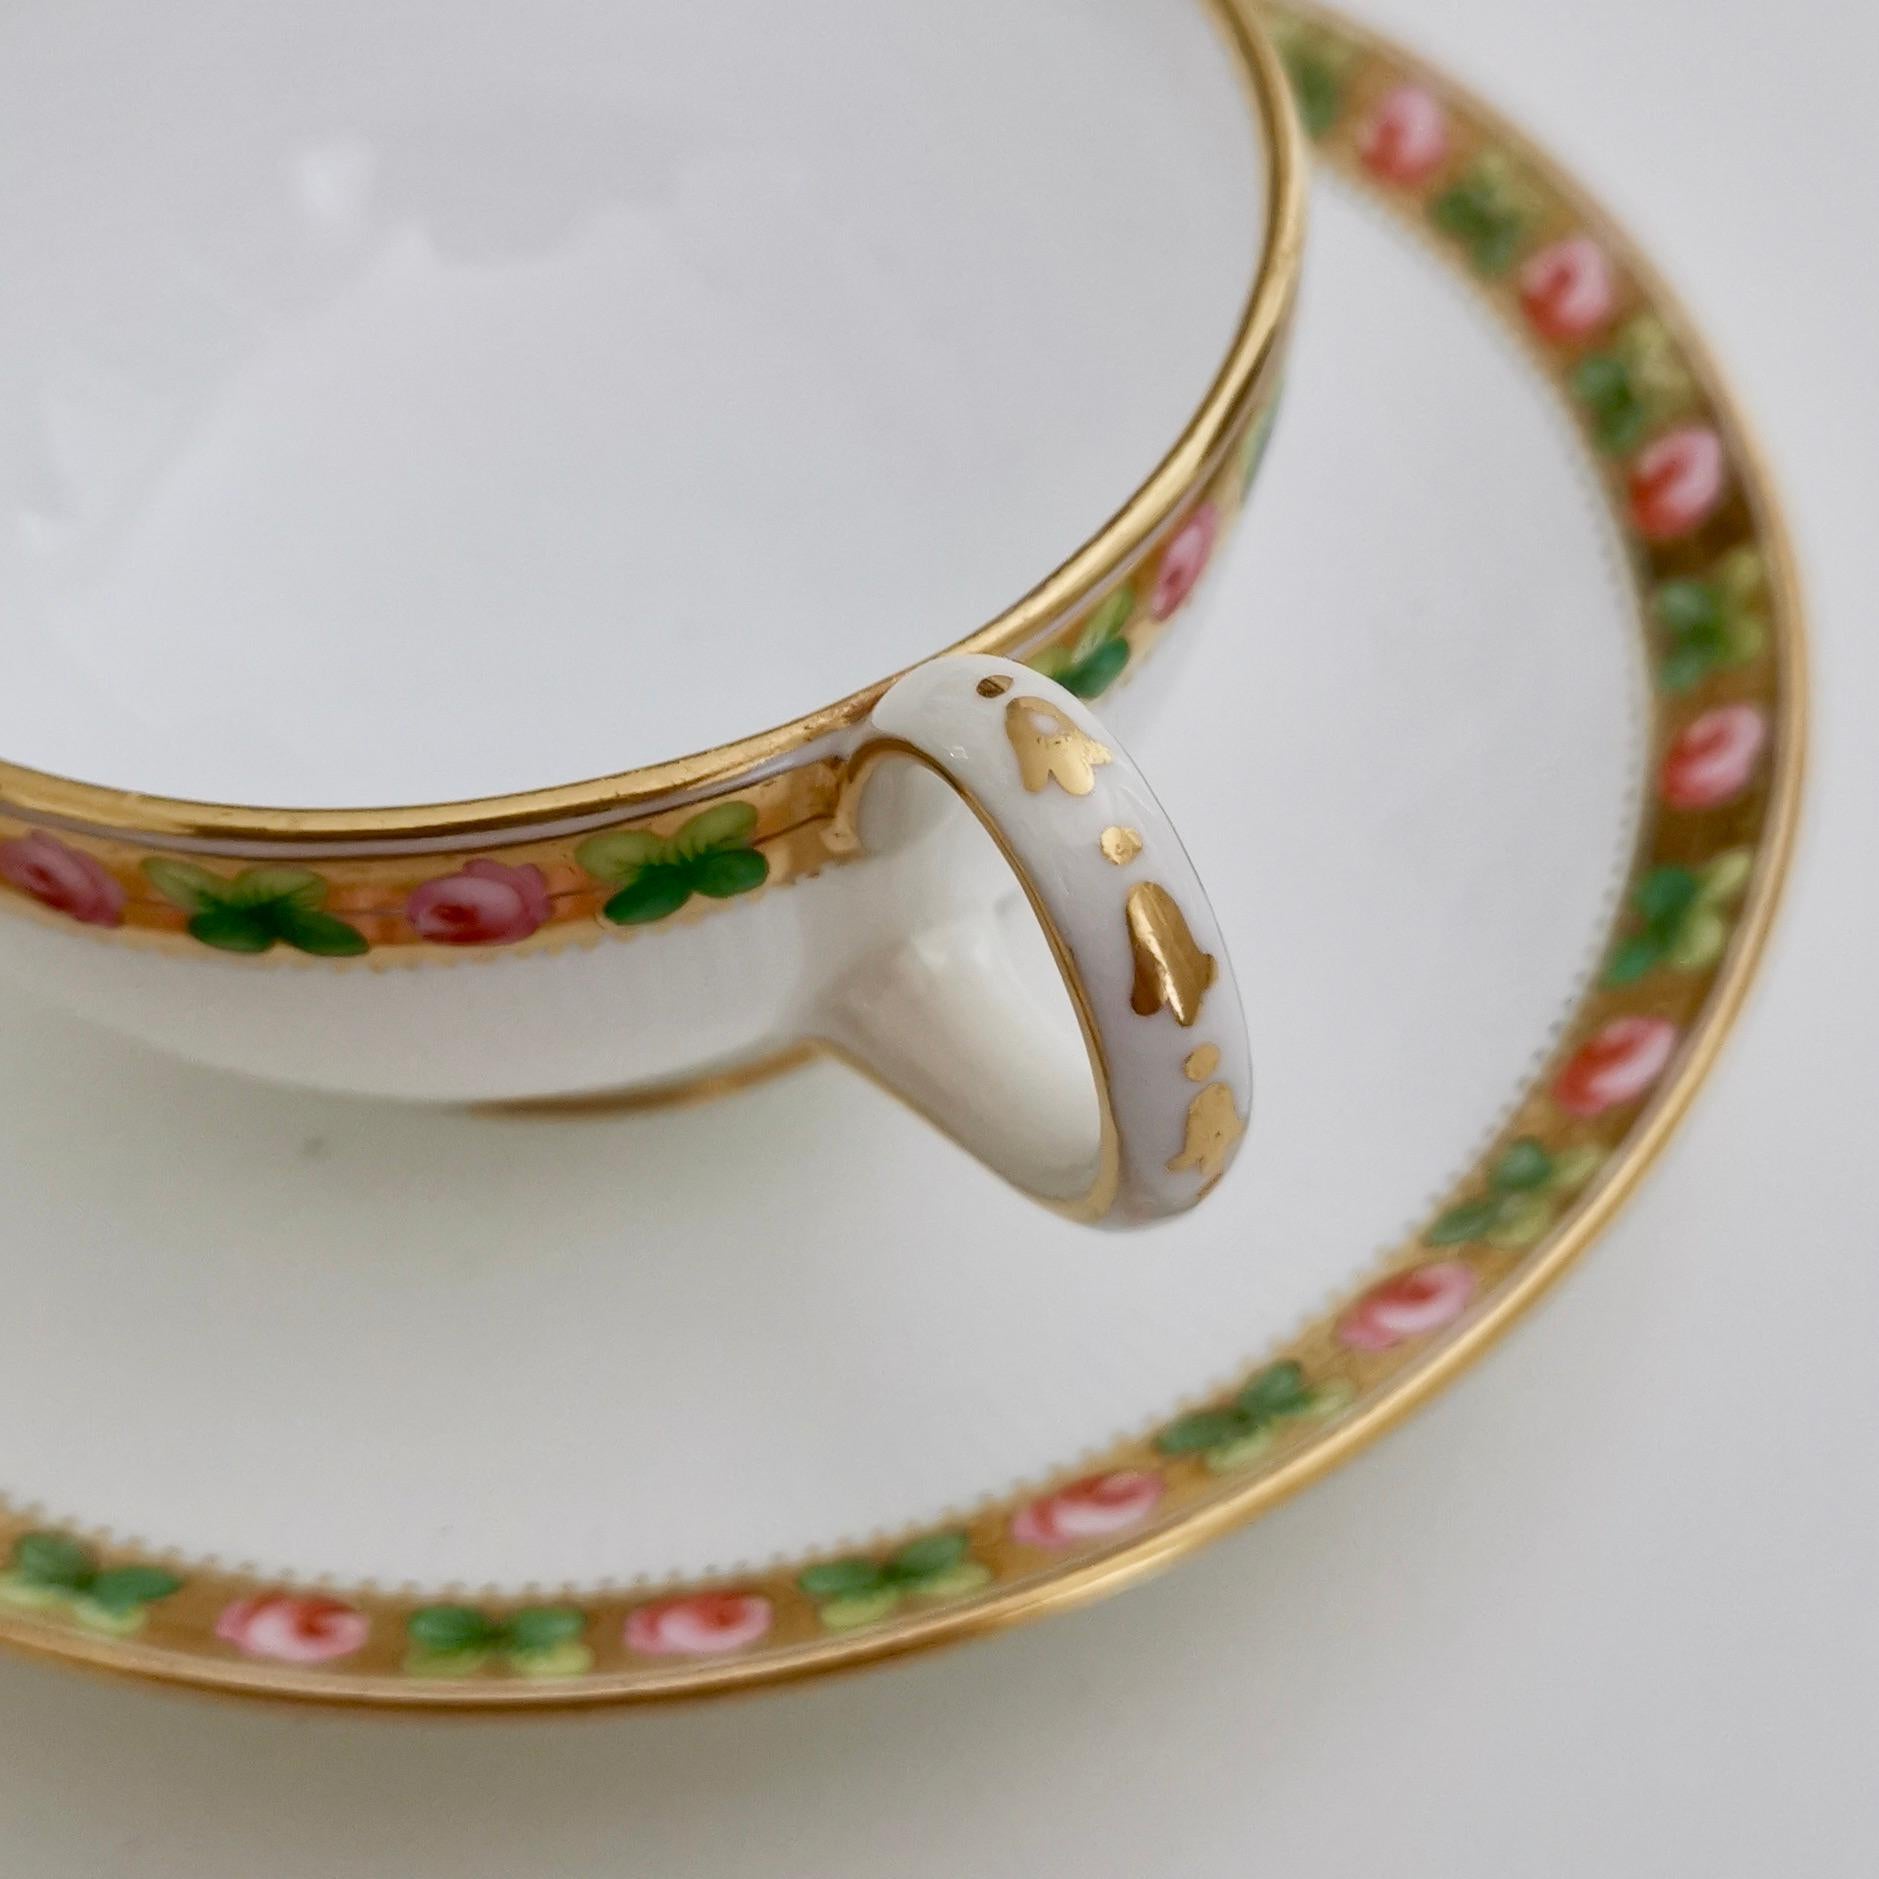 Mid-19th Century Minton Porcelain Teacup, White Paris Fluted with Roses and Gilt, 1862